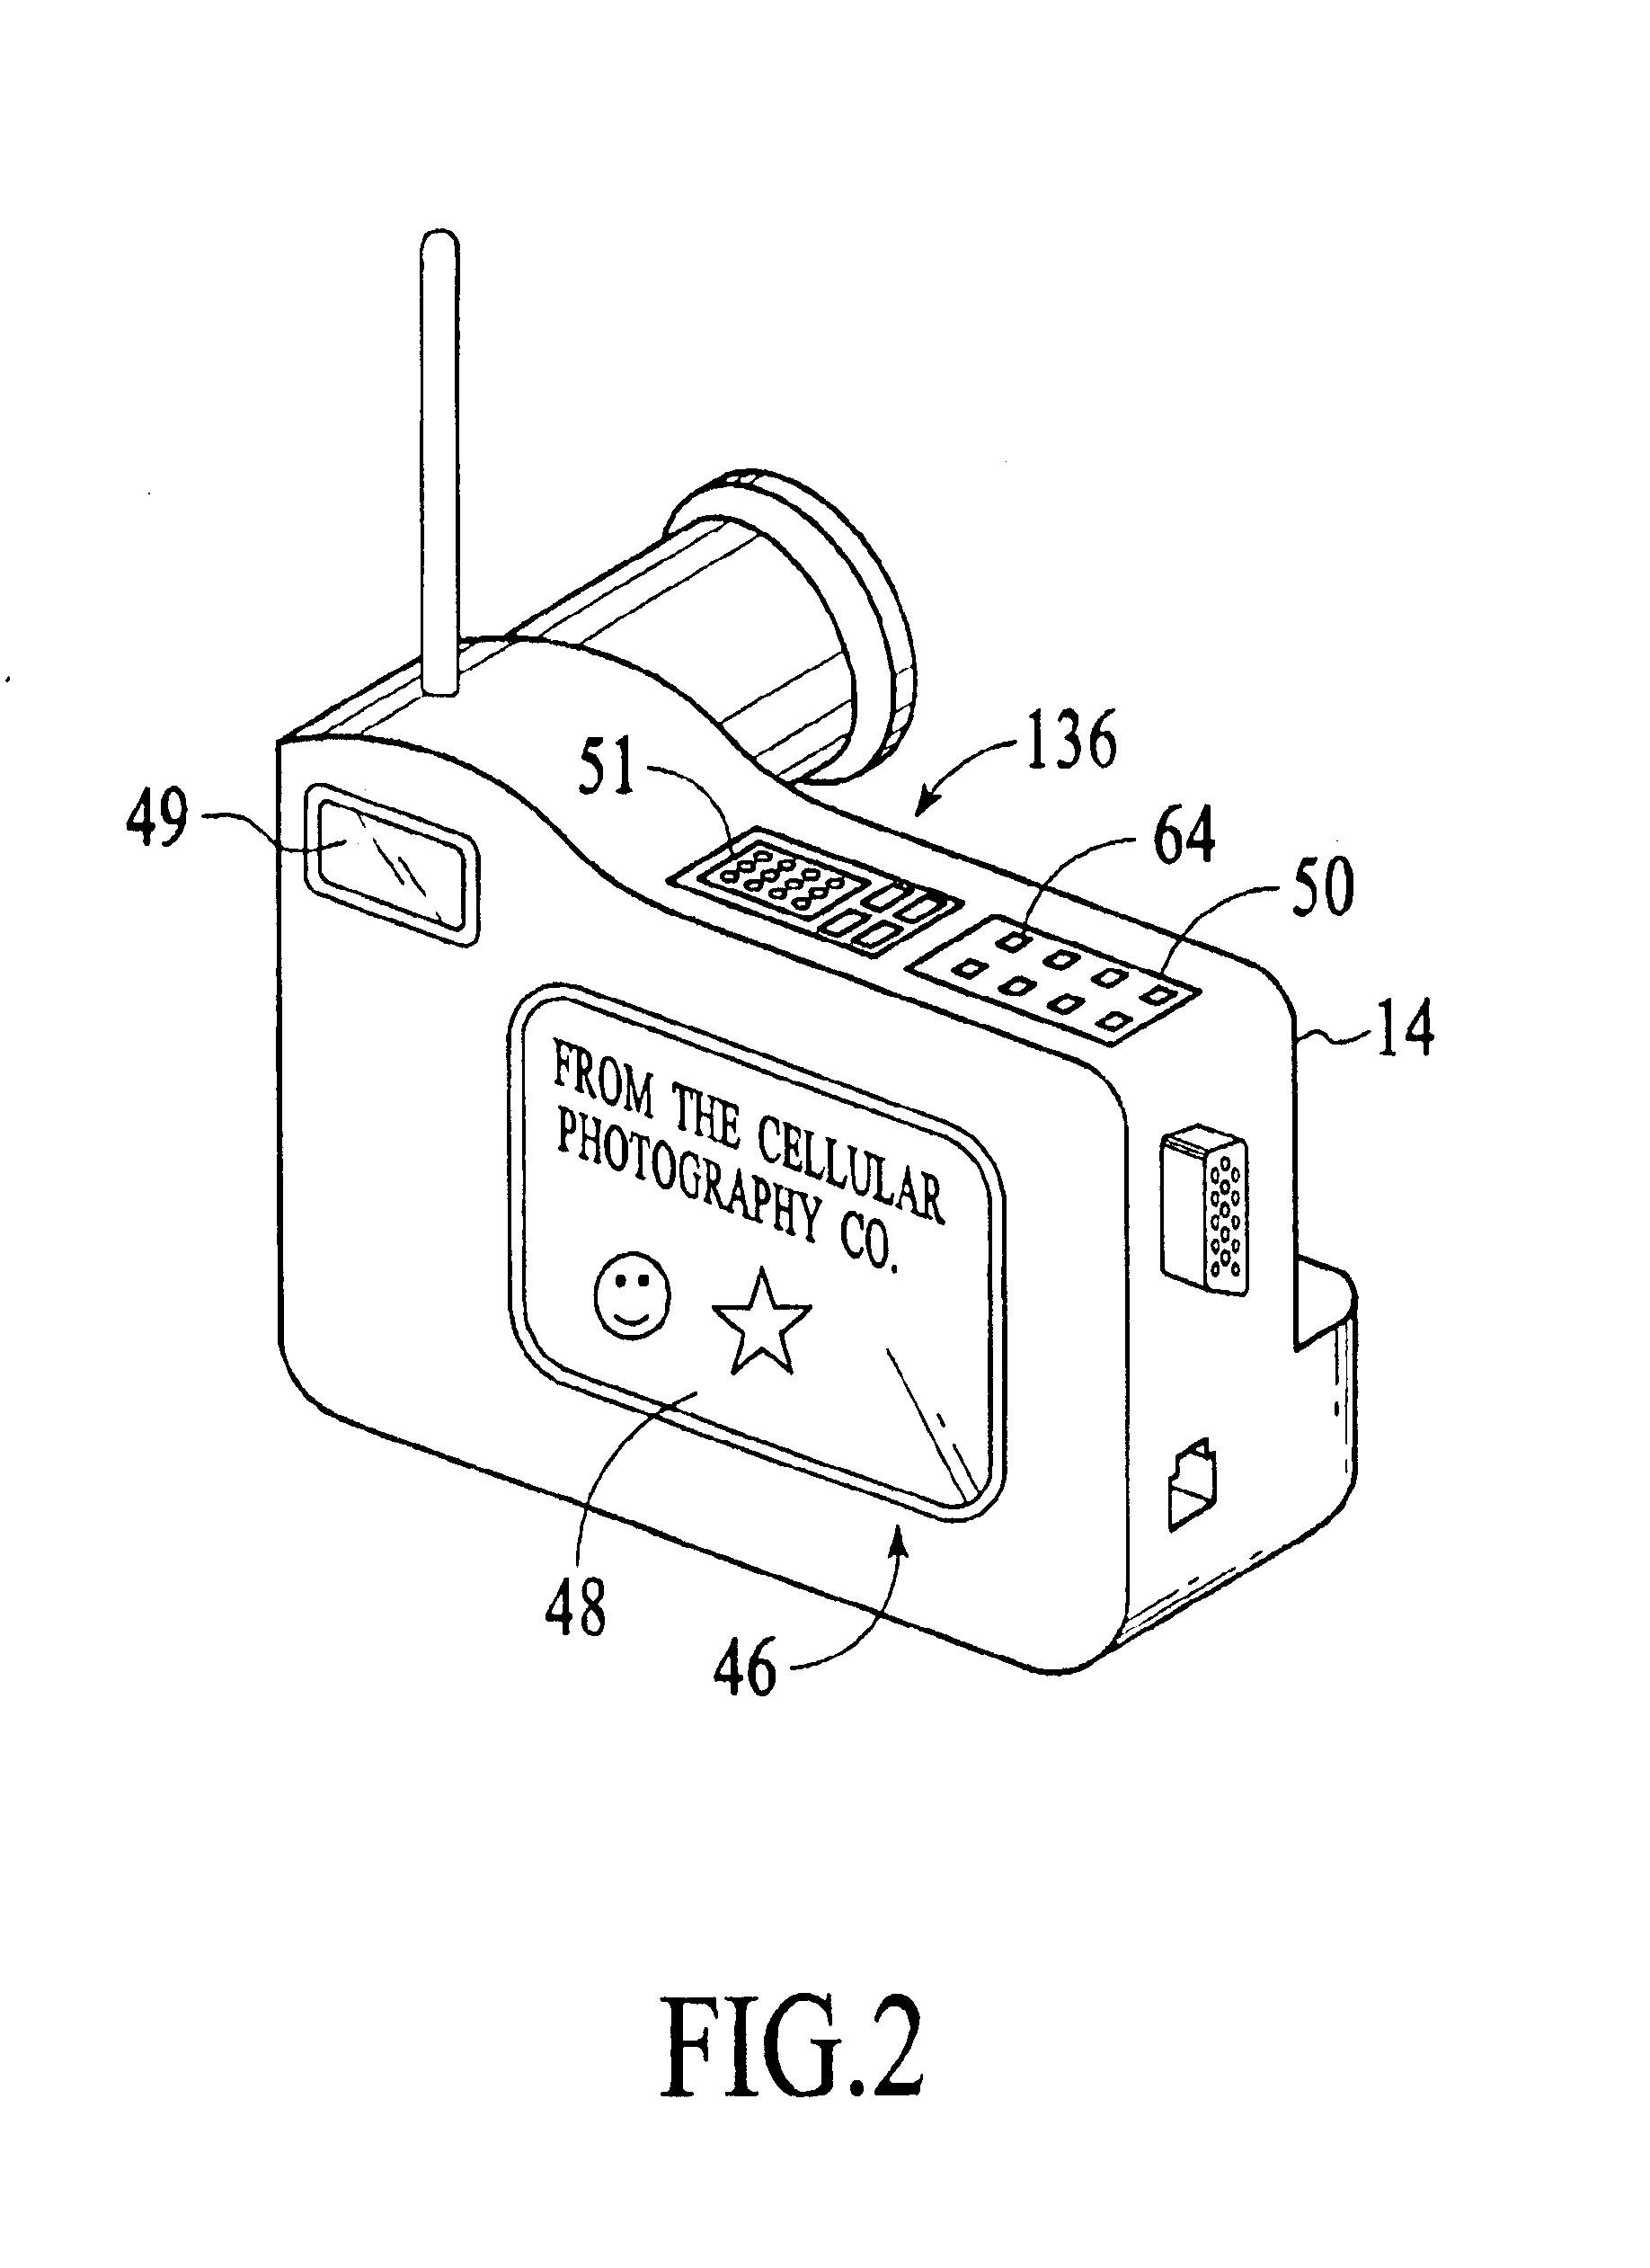 Camera messaging and advertisement system